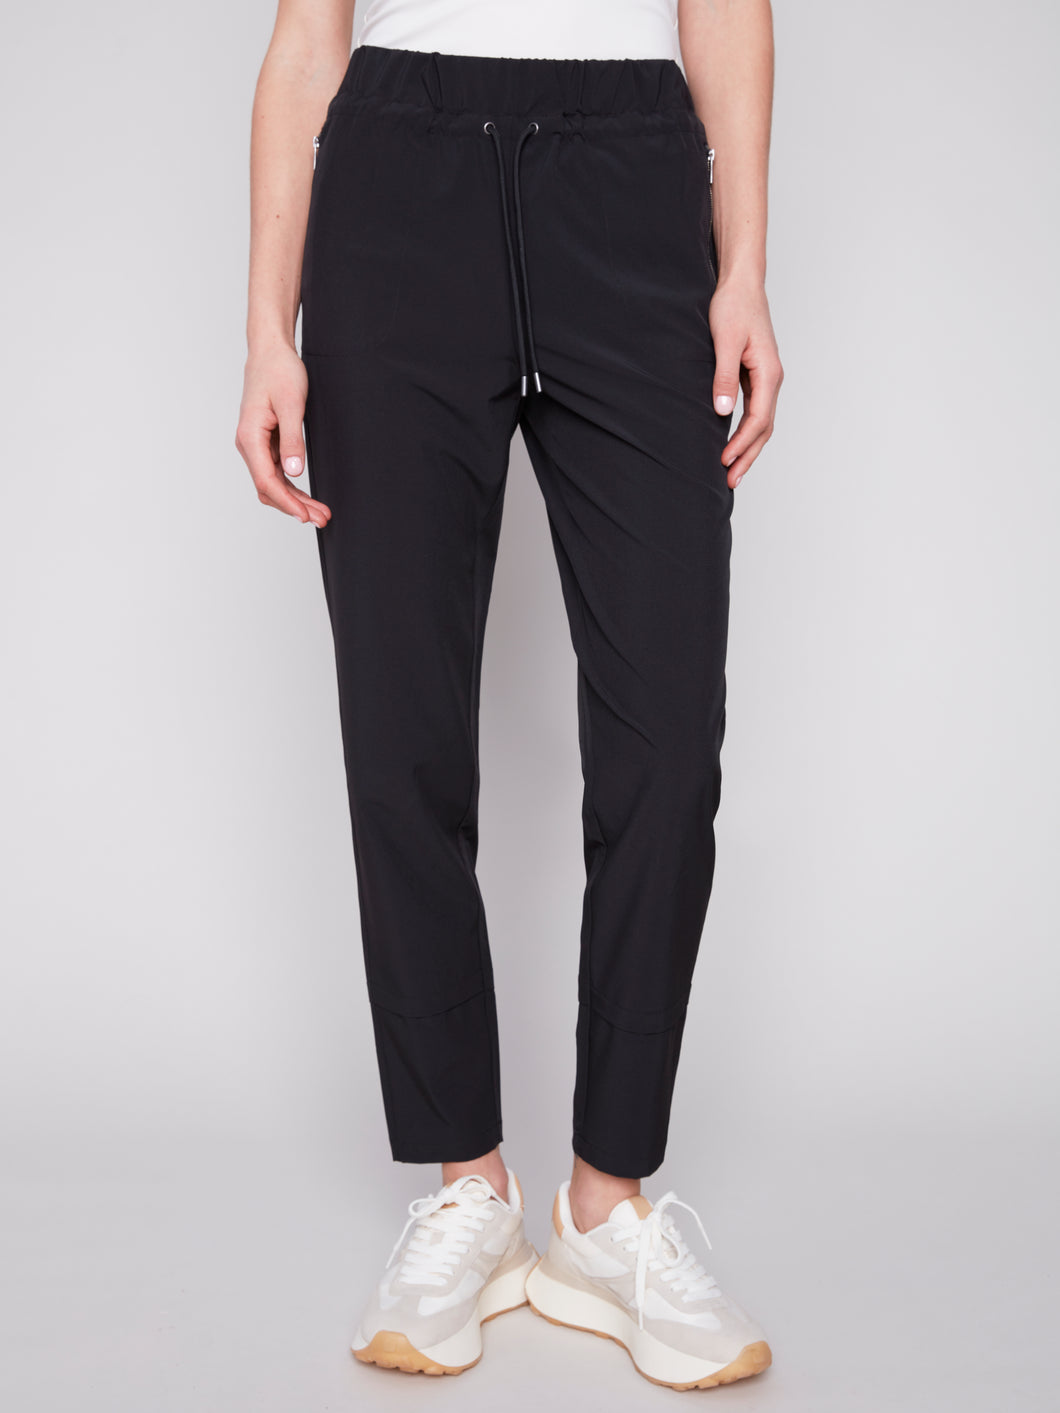 Charlie B Black Techno Pull On Pants with Zipper Pockets